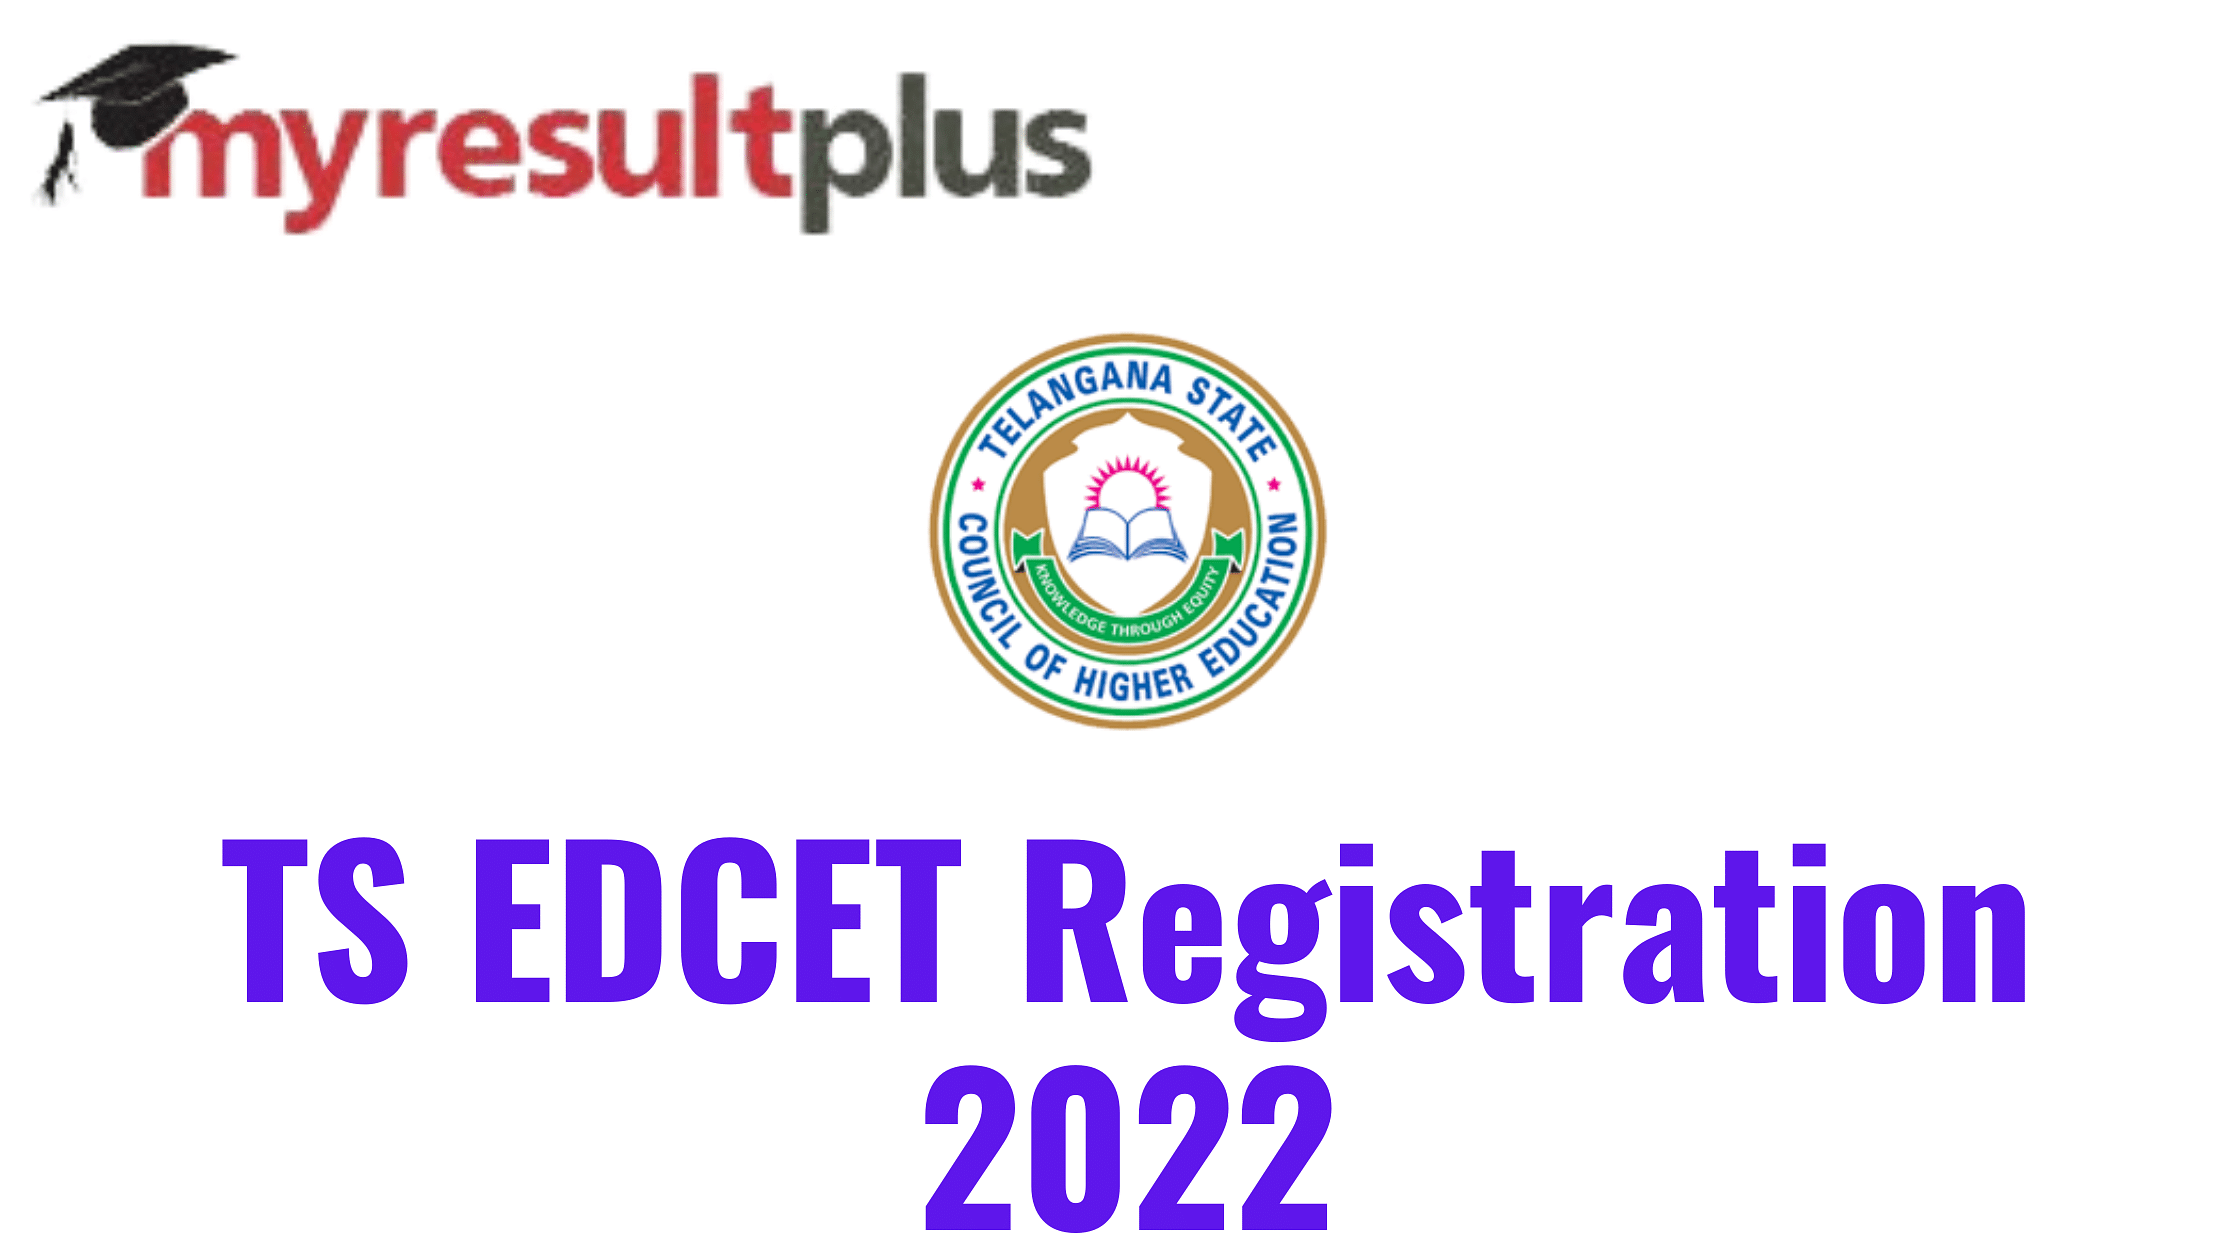 TS EDCET 2022: Registration Window Extended, Check Steps To Apply Here